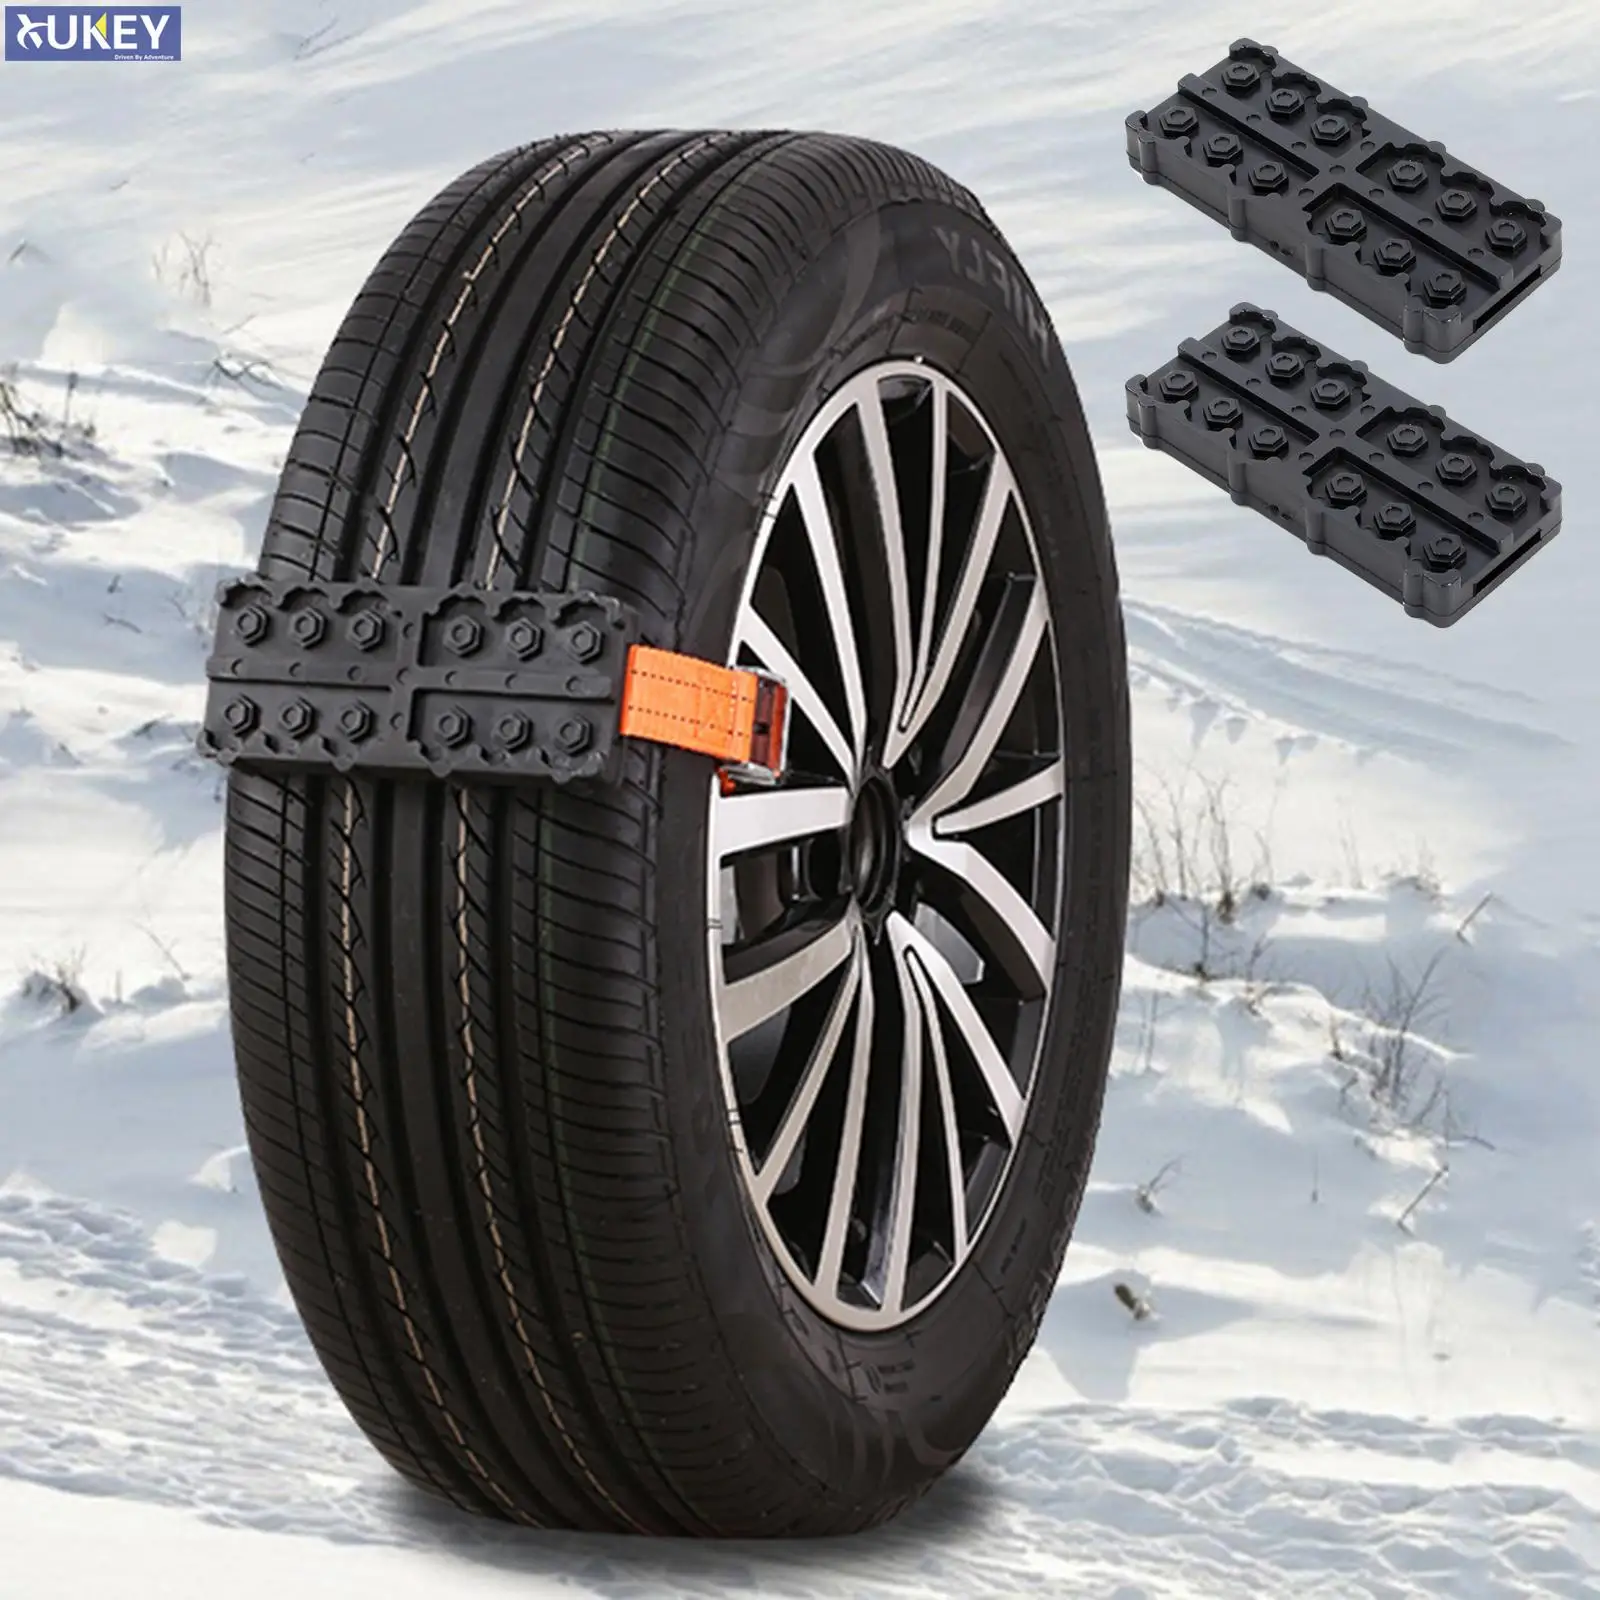 

2 Pcs Car Tire Traction Blocks Tire Chain Straps Durable PU Anti-Skid Track Rescue Emergency Snow Mud Sand Escape Snow Mud Ice